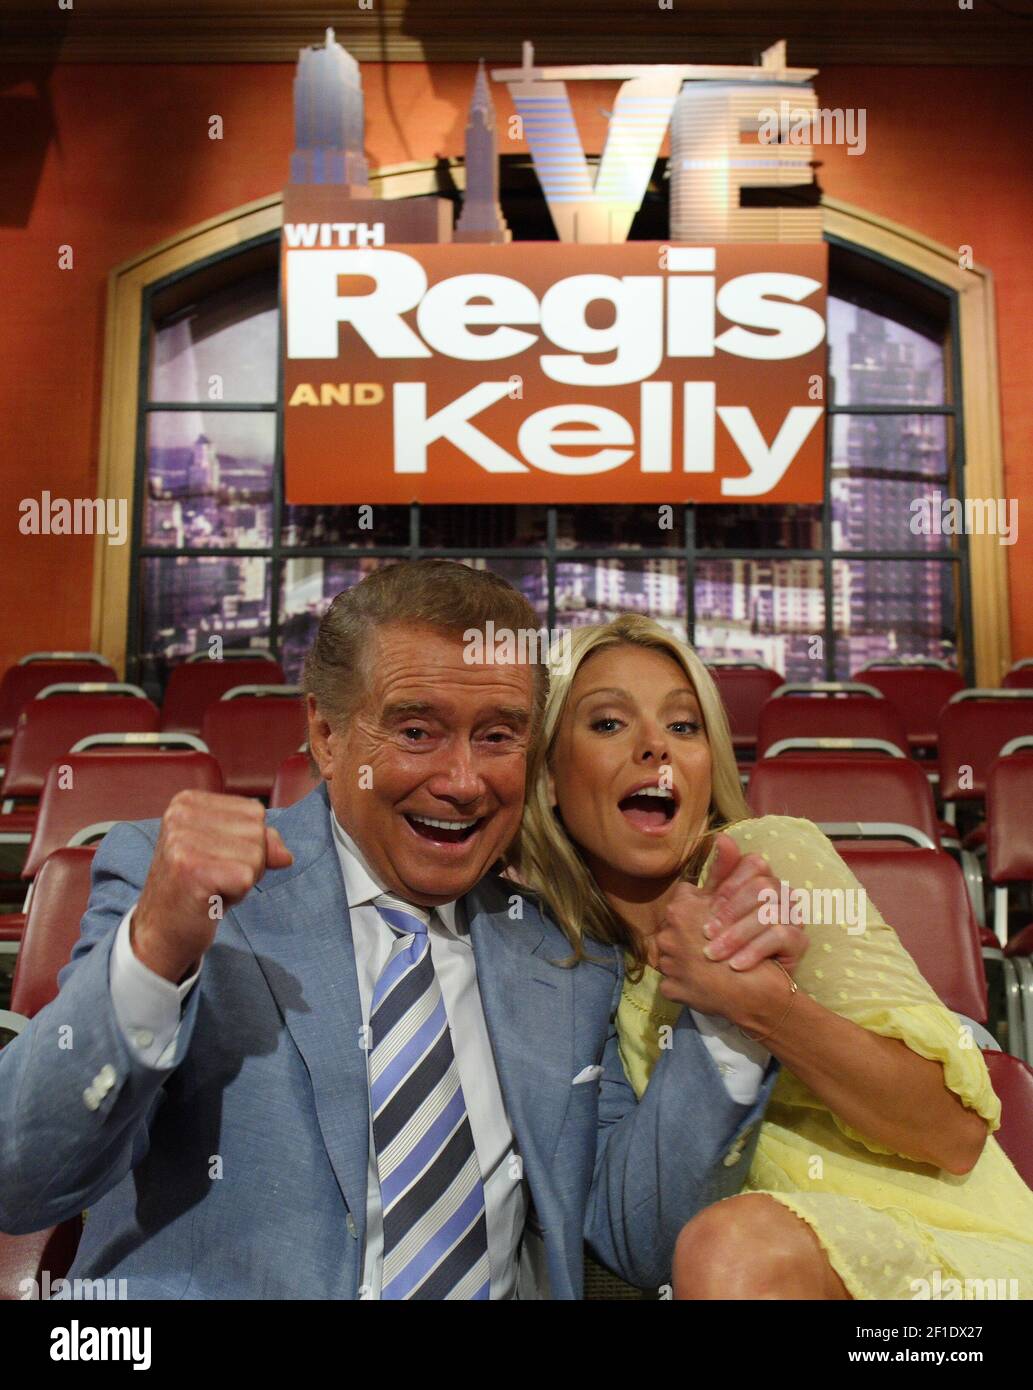 Aug 15, 2007; New York, NY; Regis Philbin and Kelly Ripa pose for a portrait photo on the set of 'Live with Regis and Kelly' at the show's studios in New York City. Mandatory Credit: Eileen Blass-USA TODAY/Sipa USA Stock Photo